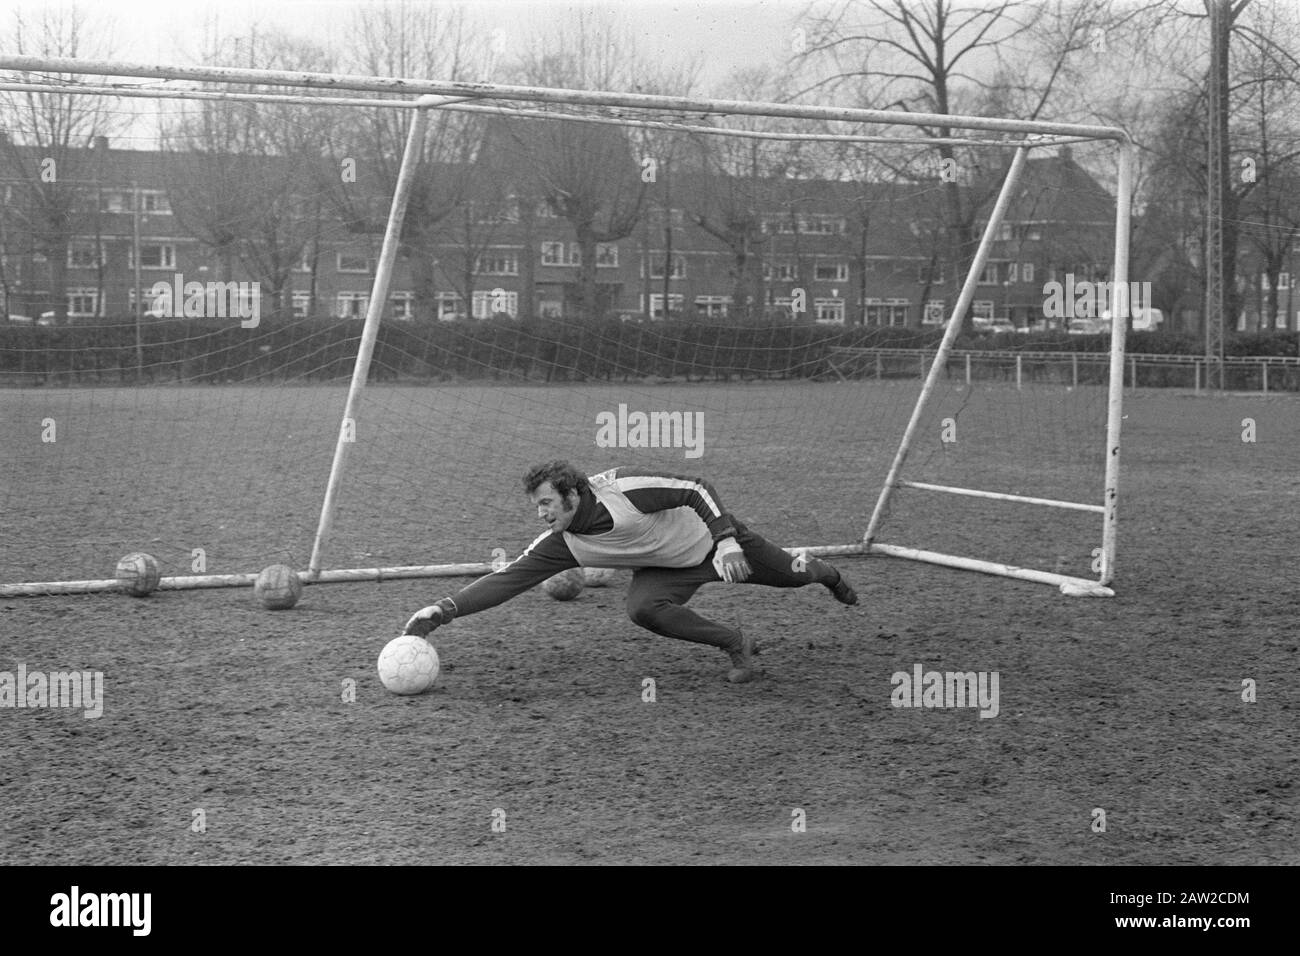 Press conference and training of Ajax European Cup match against Arsenal; Training goalkeeper Stuy Date: March 6, 1972 Keywords: goalies, sports, soccer Institution Name: Arsenal, European Cup Stock Photo